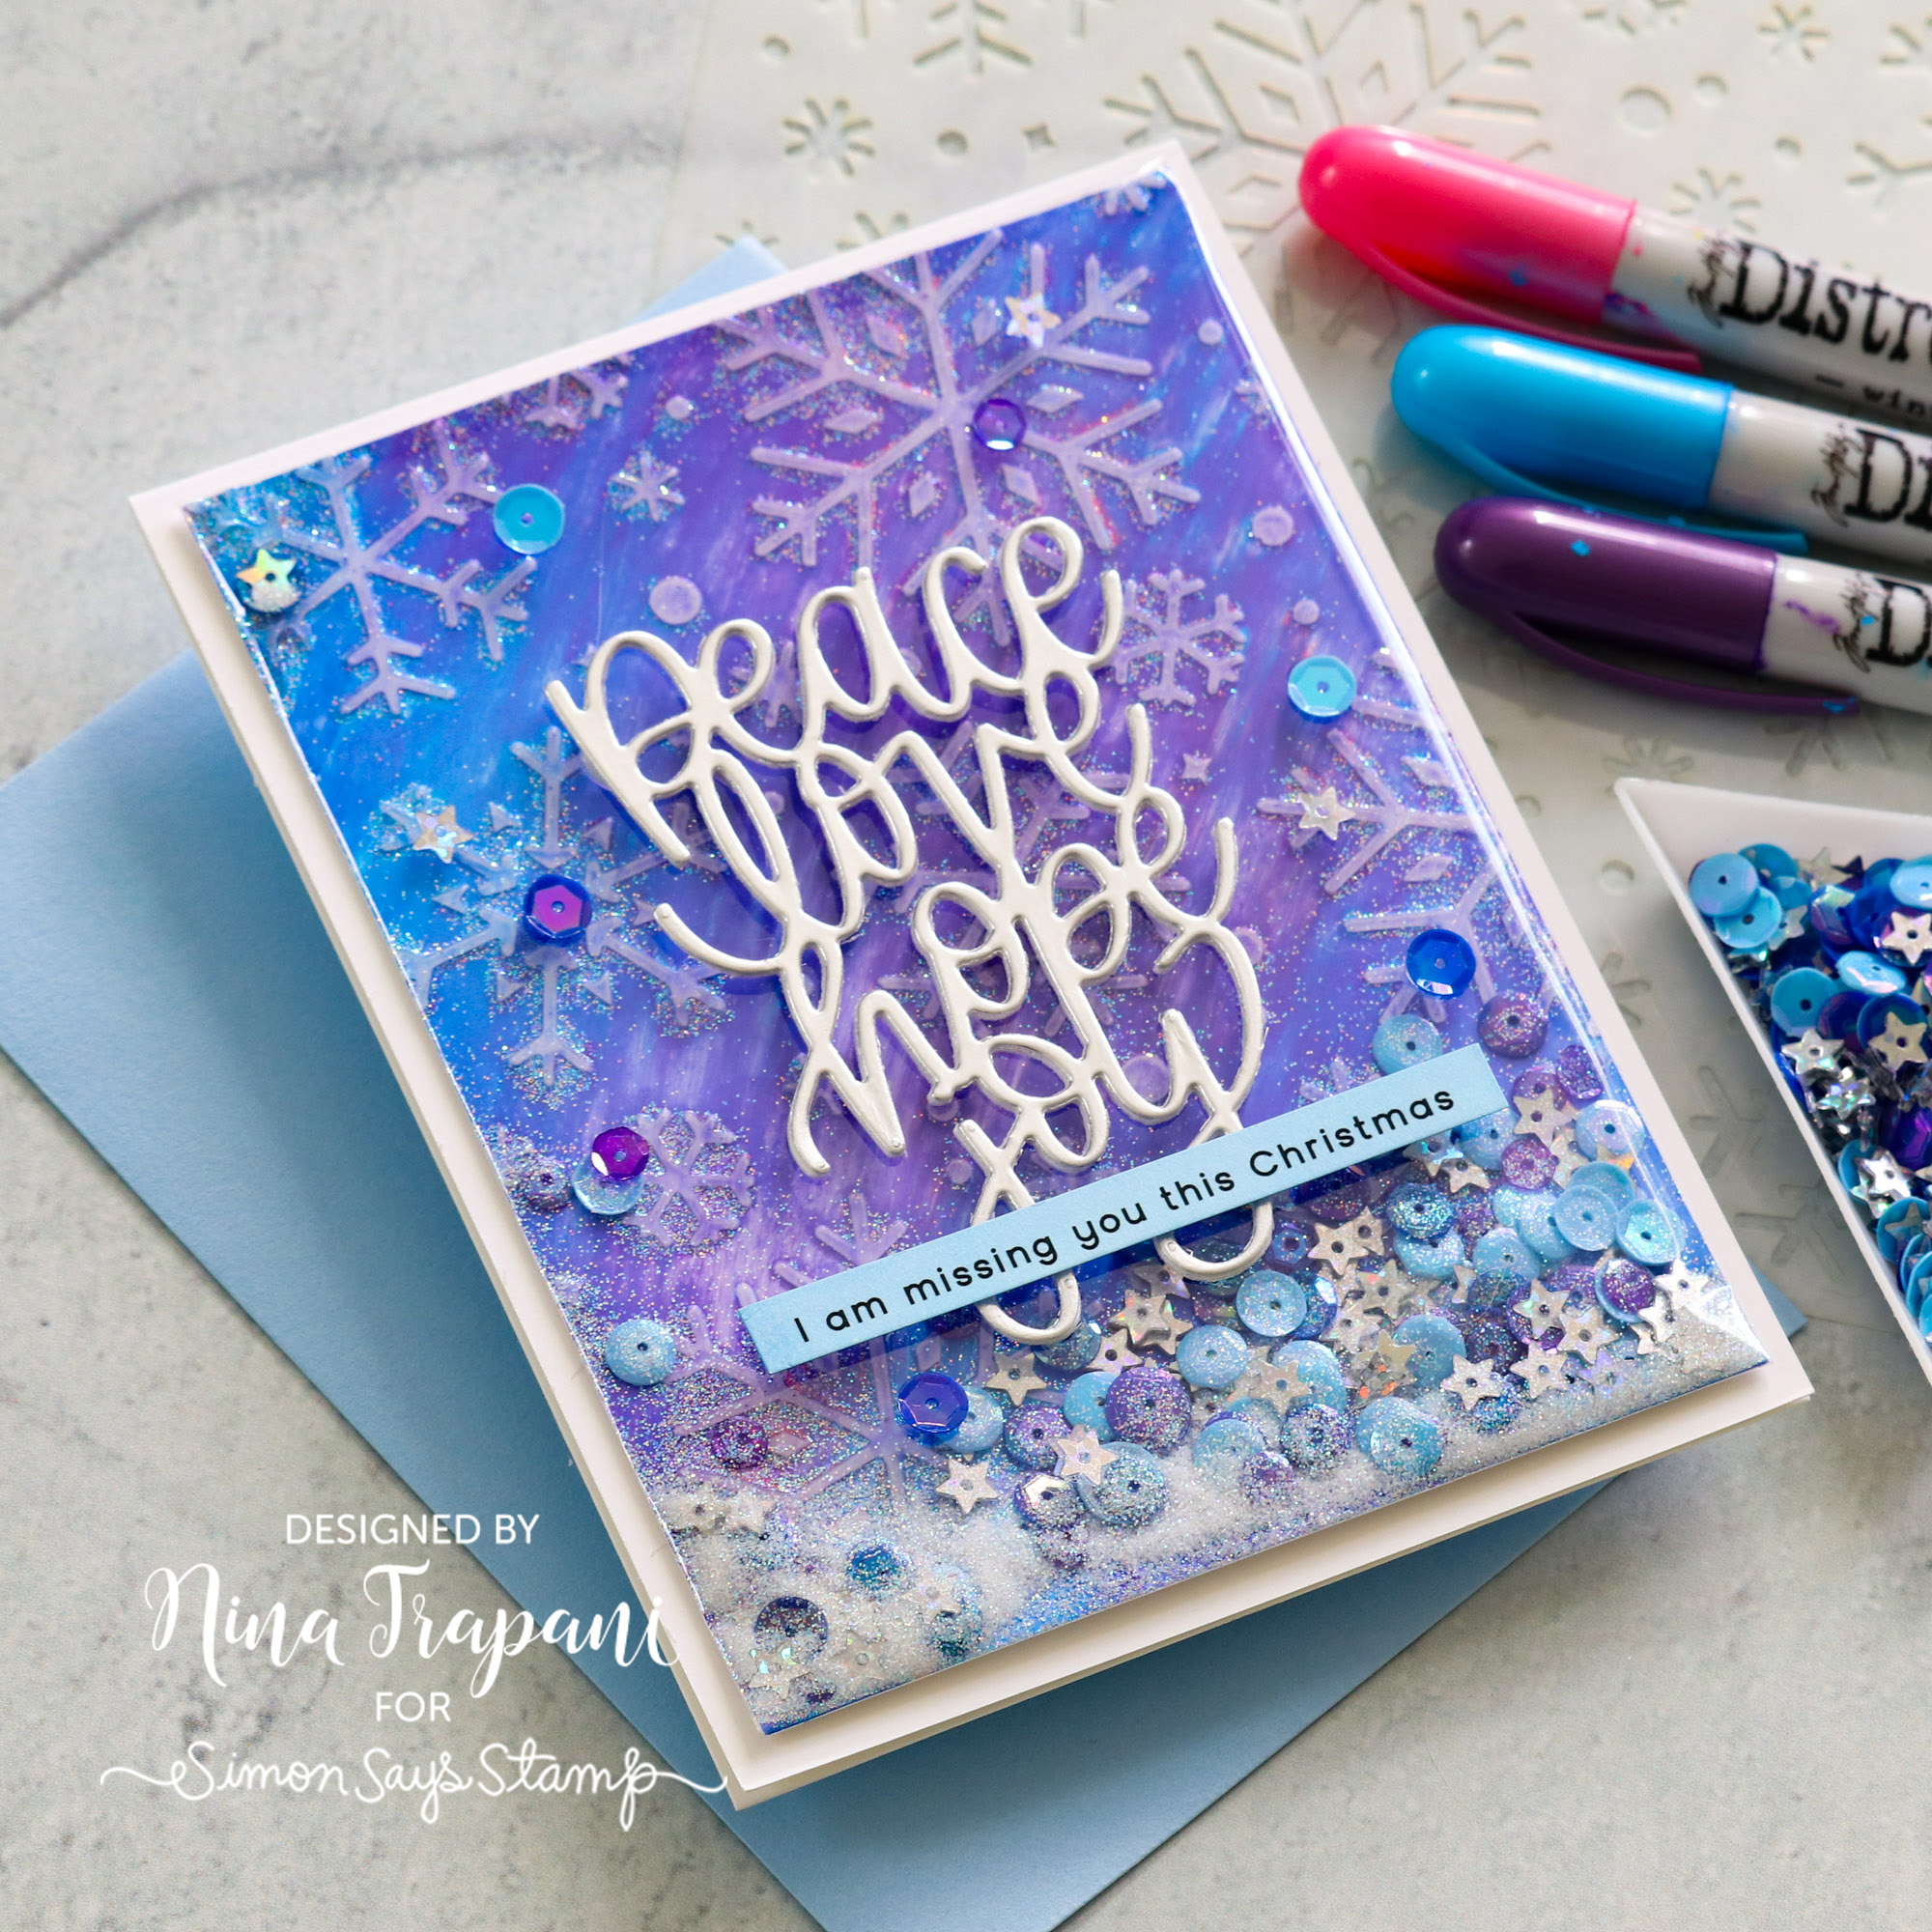 Card Making Techniques With Distress Crayons! - Inklipse